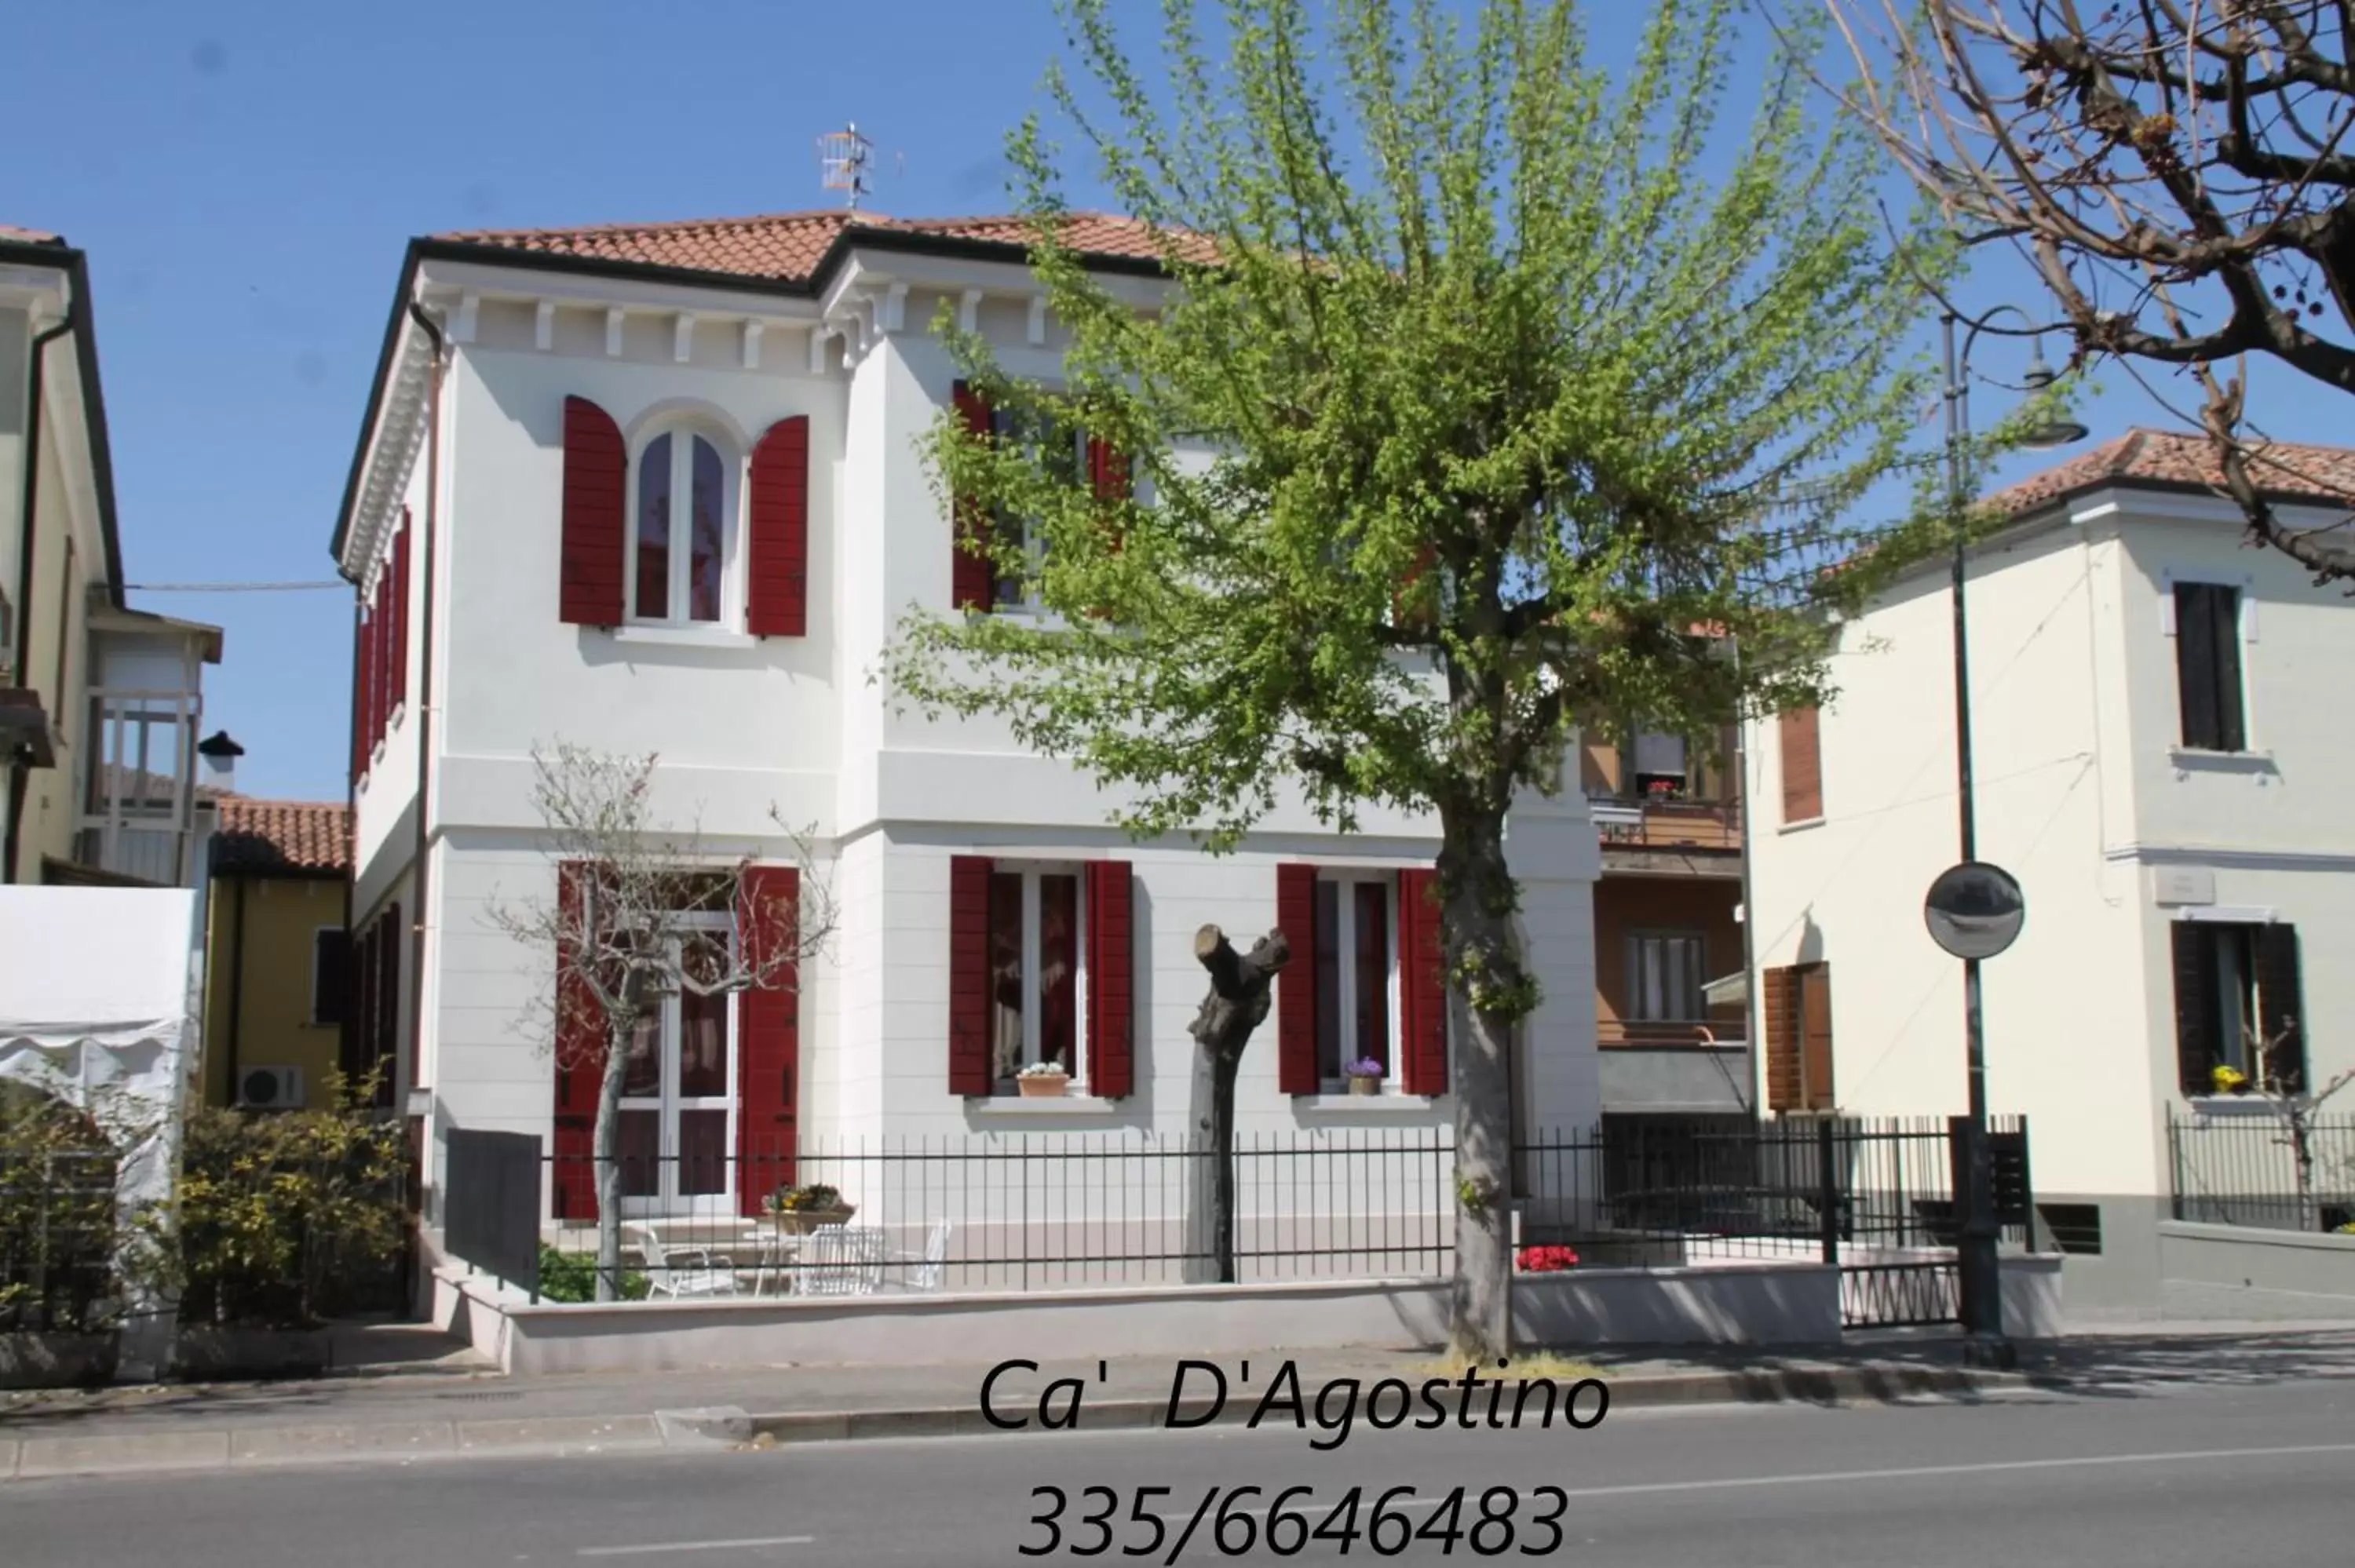 Property Building in Ca' D'Agostino